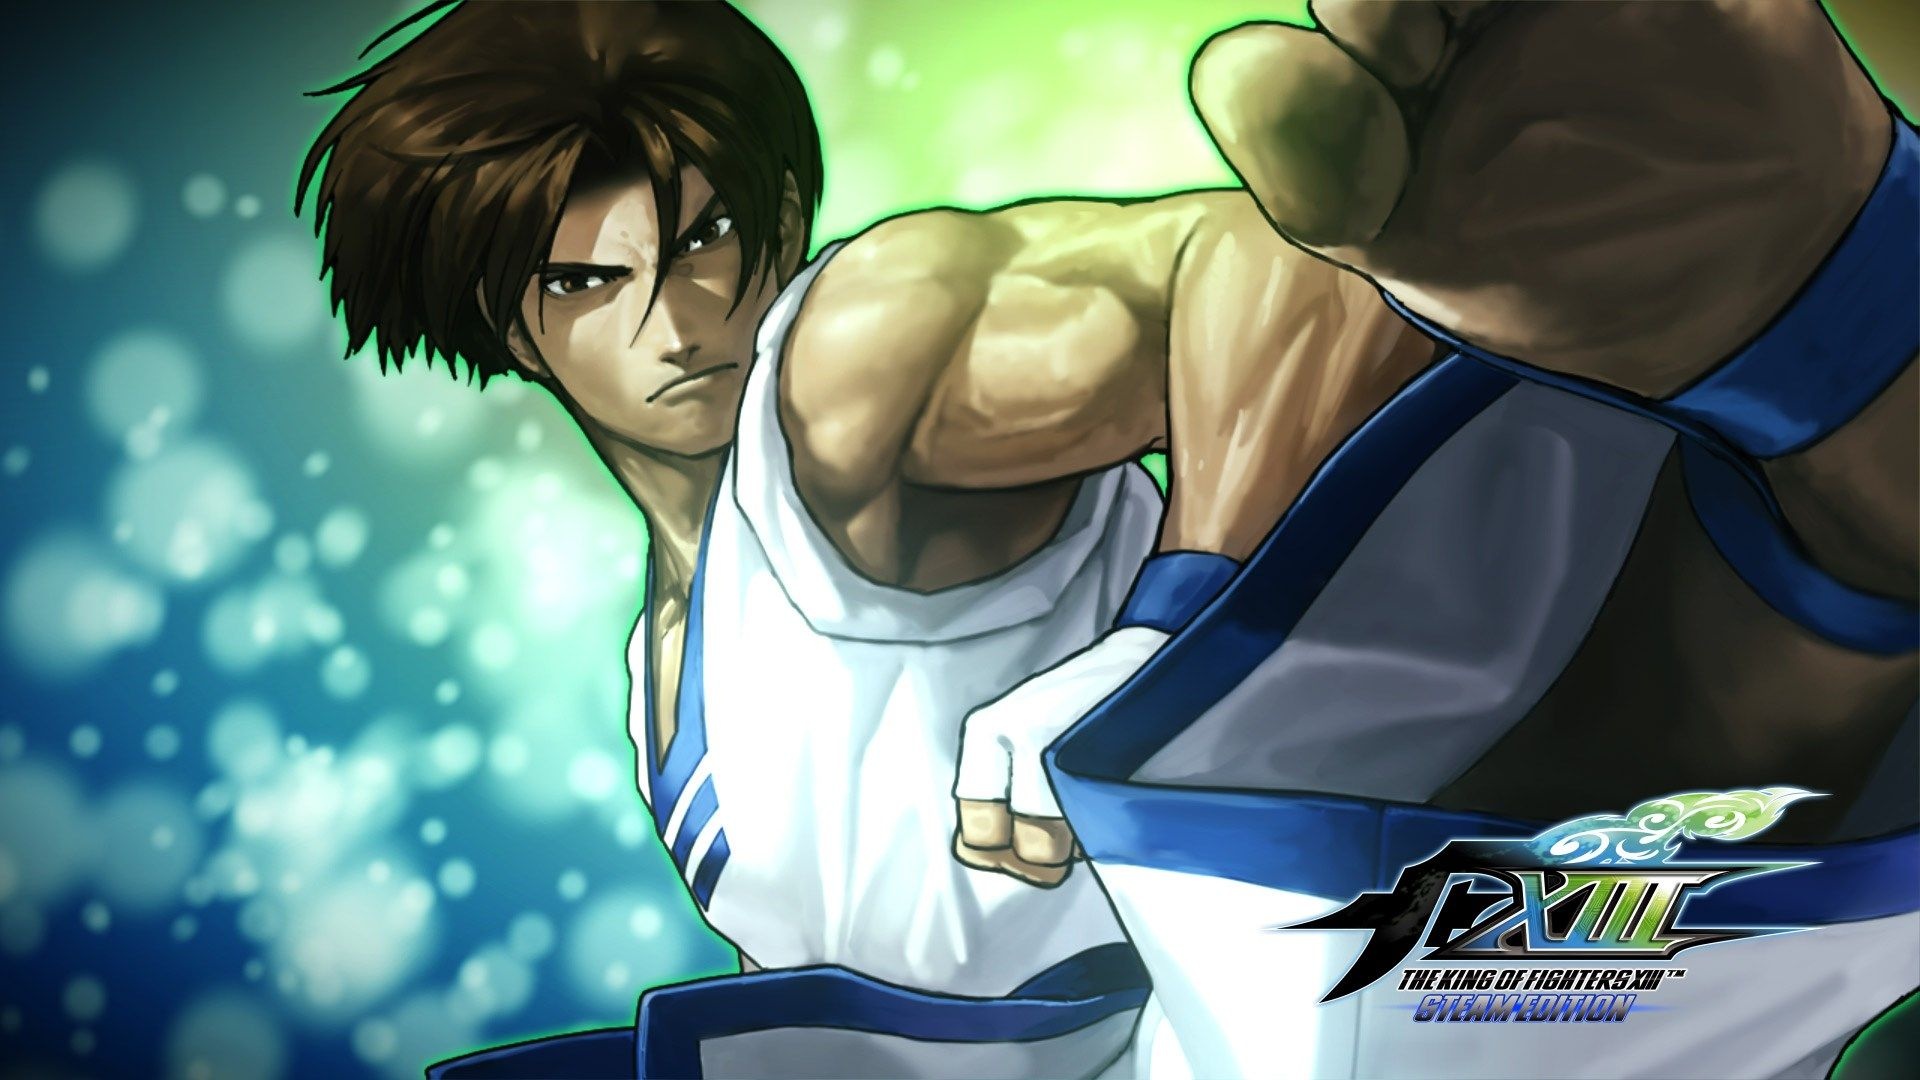 King of Fighters XIII, Steam Edition game, King of Fighters, Great backgrounds, 1920x1080 Full HD Desktop